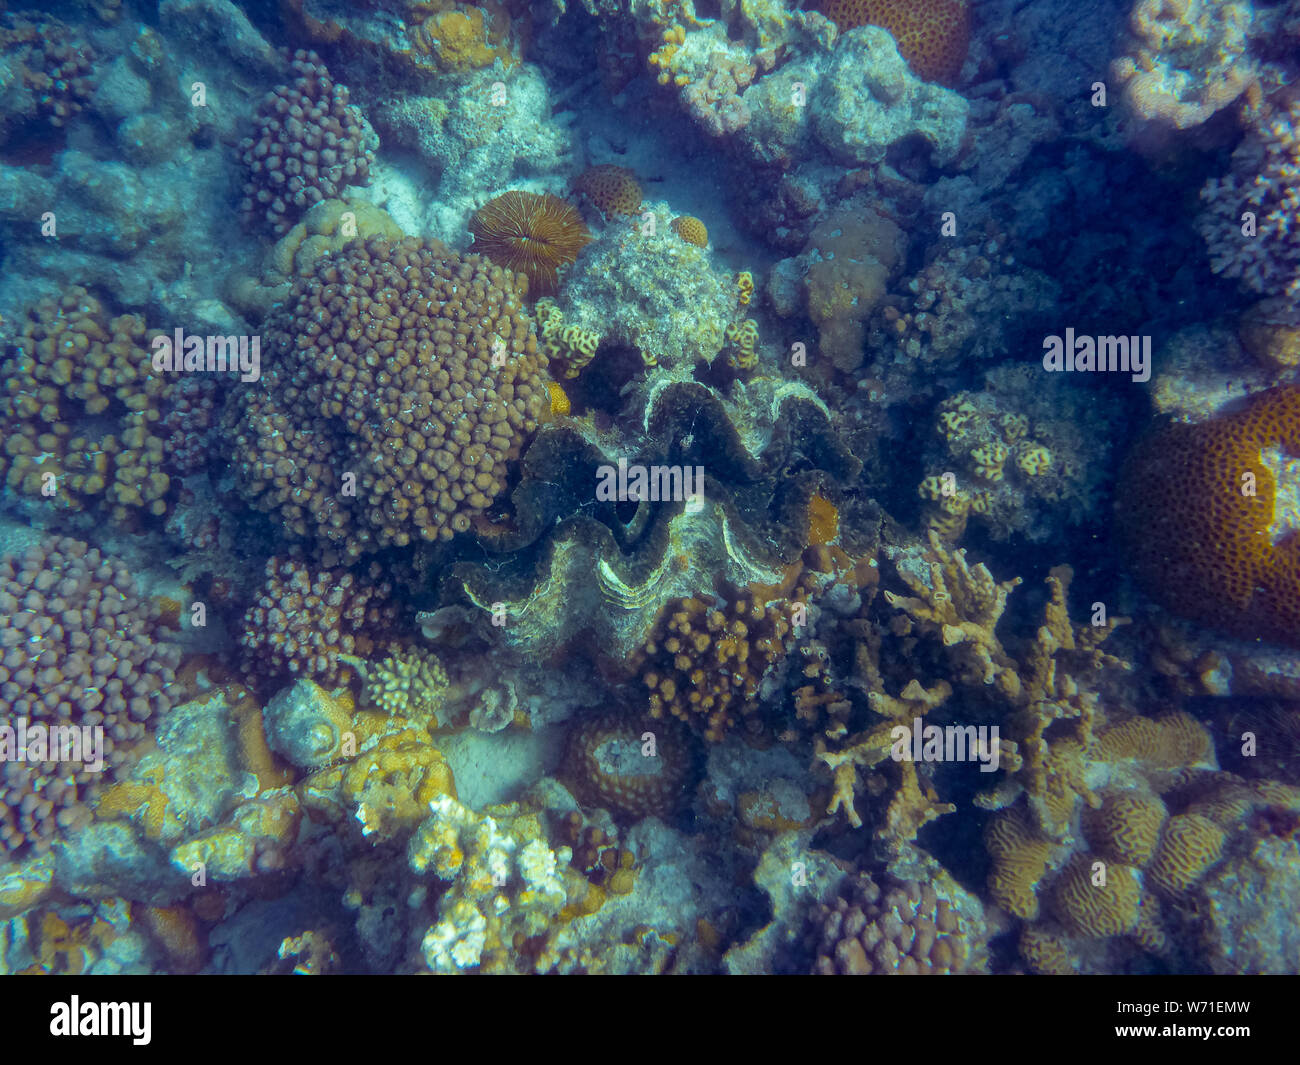 Giant clam massive sea shell between corals at Ningaloo Reef close to Coral Bay Australia Stock Photo